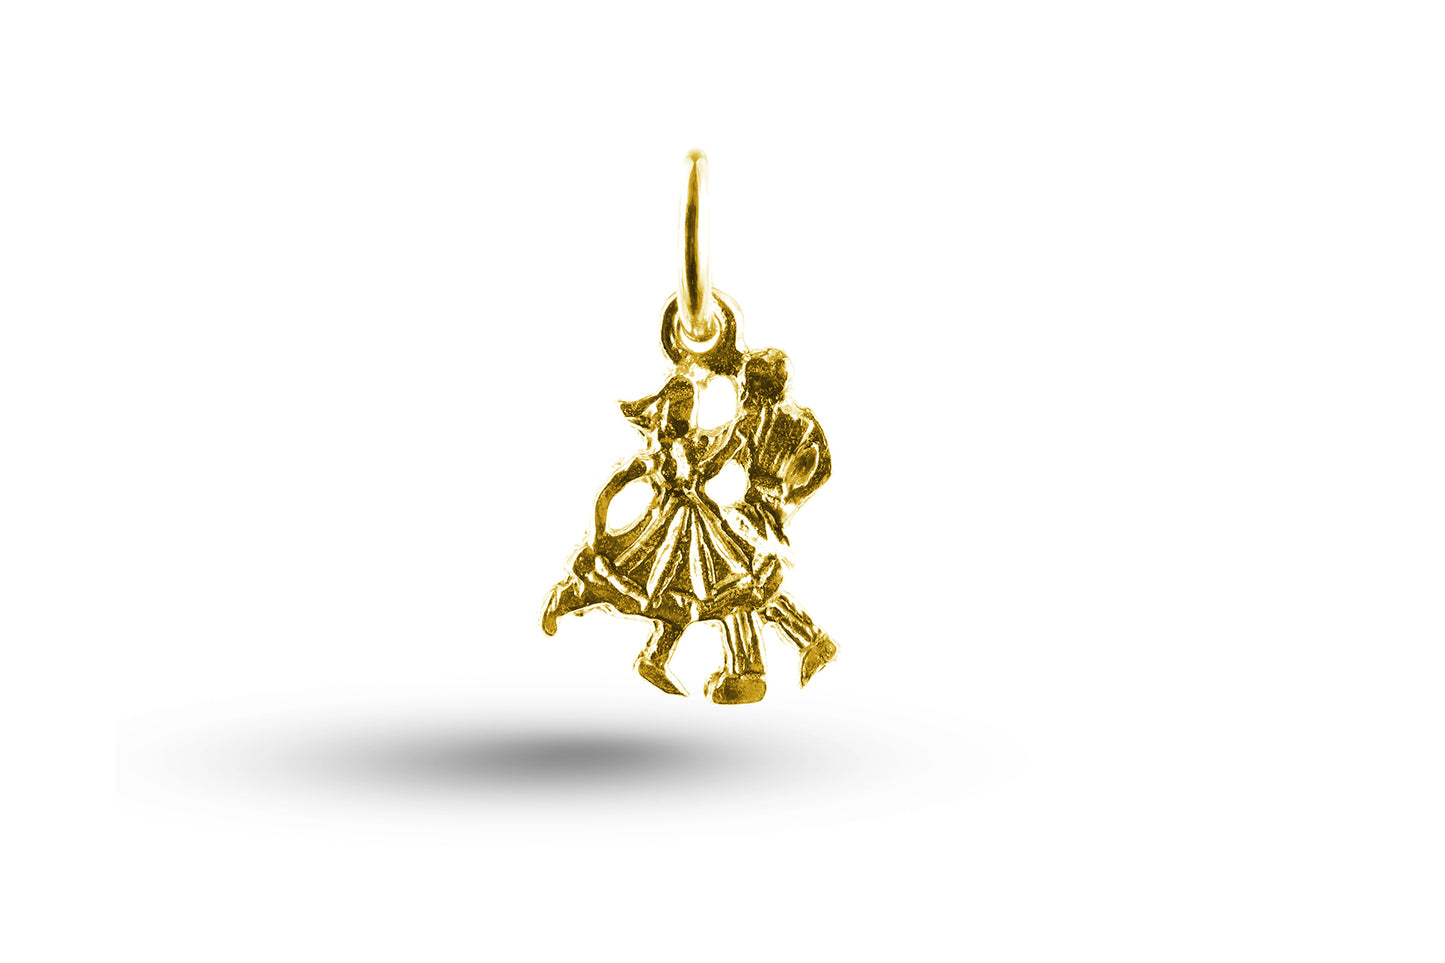 Yellow gold Rock 'N' Rollers charm.